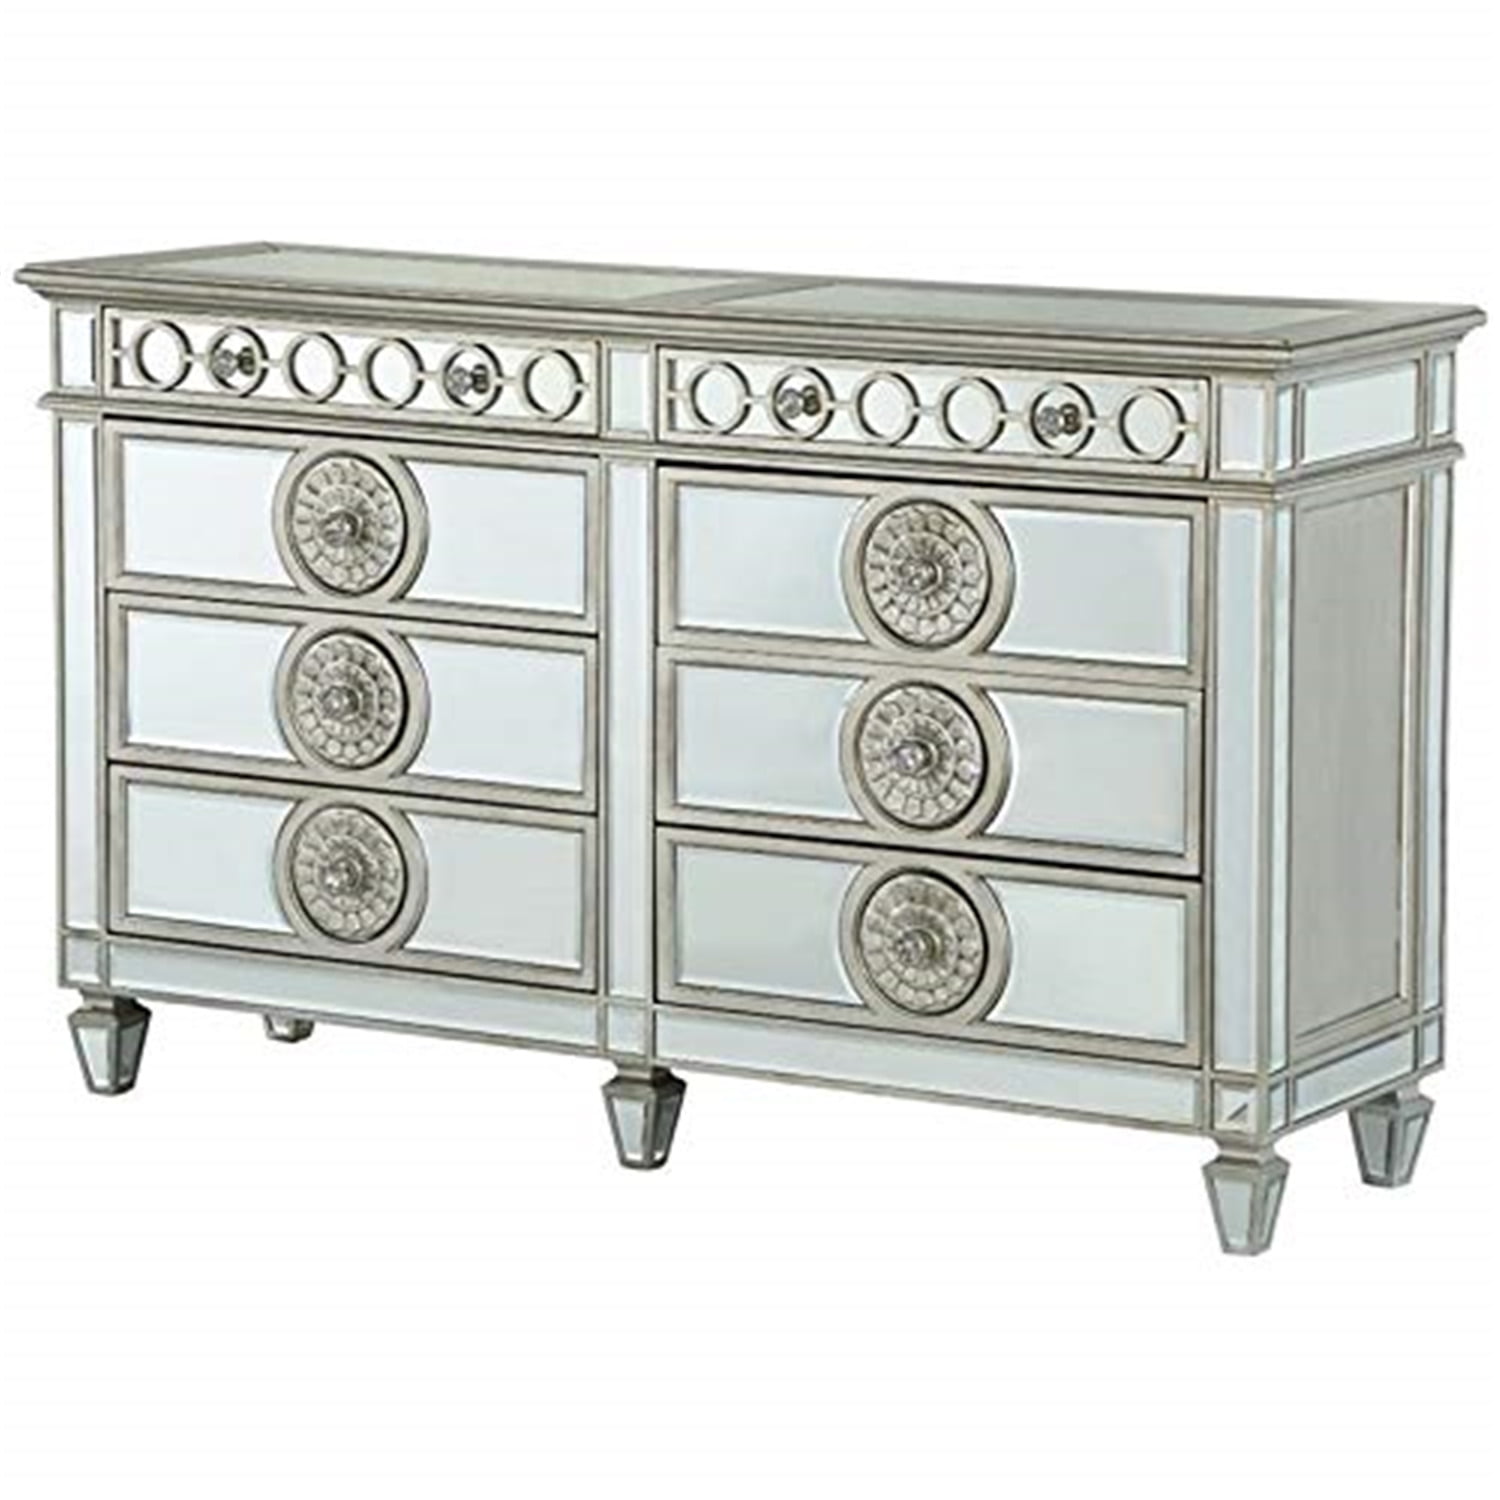 Picture of ACME 26155 Varian Dresser - Mirrored - 41 x 68 x 20 in.